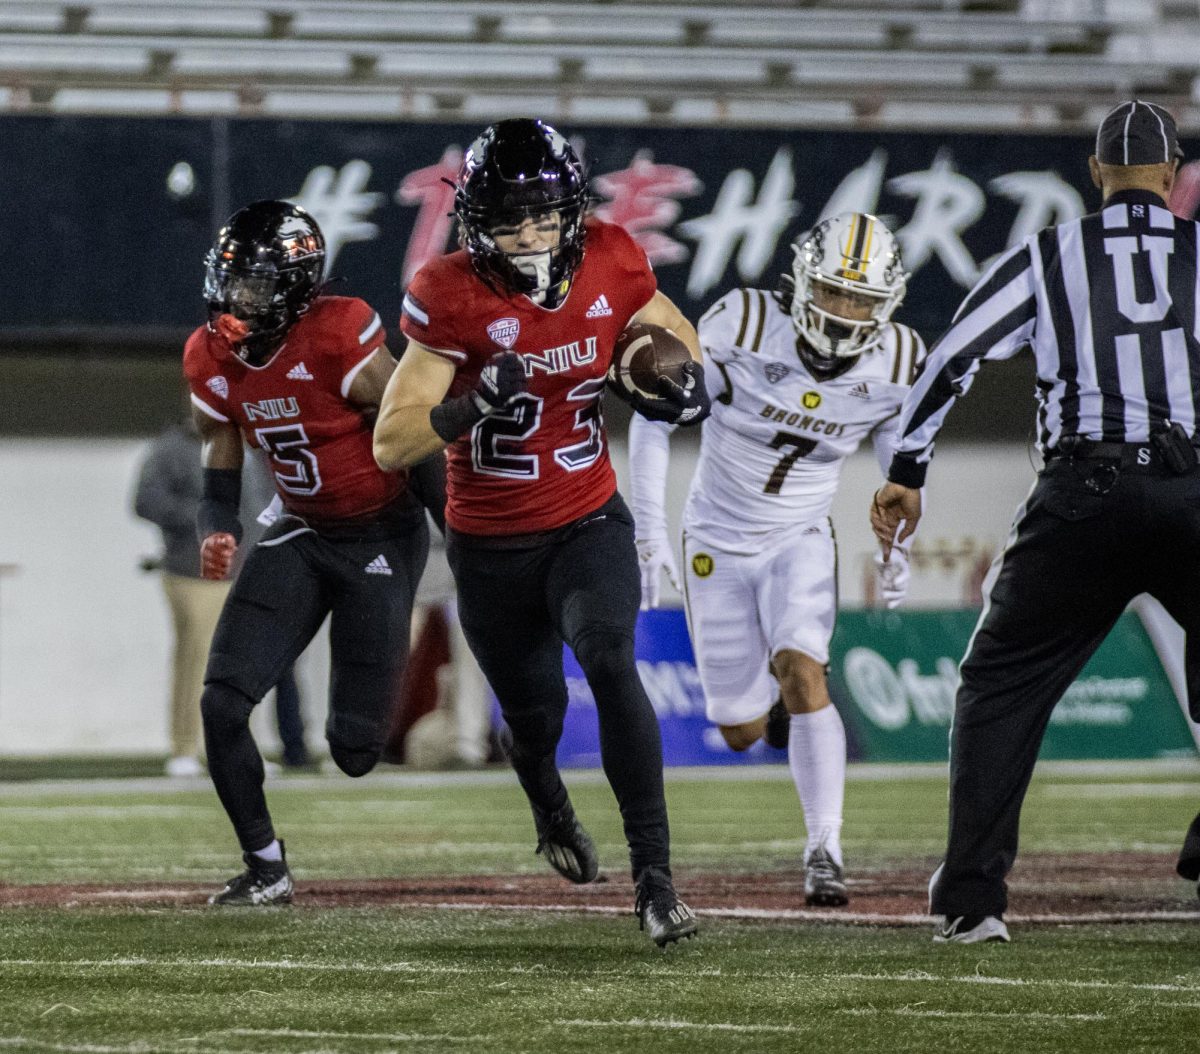 Redshirt freshman Dane Pardridge returns a punt from Western Michigan University on Tuesday. NIU football defeated the Broncos 24-0 to win its fifth game of the year. (Tim Dodge | Northern Star)